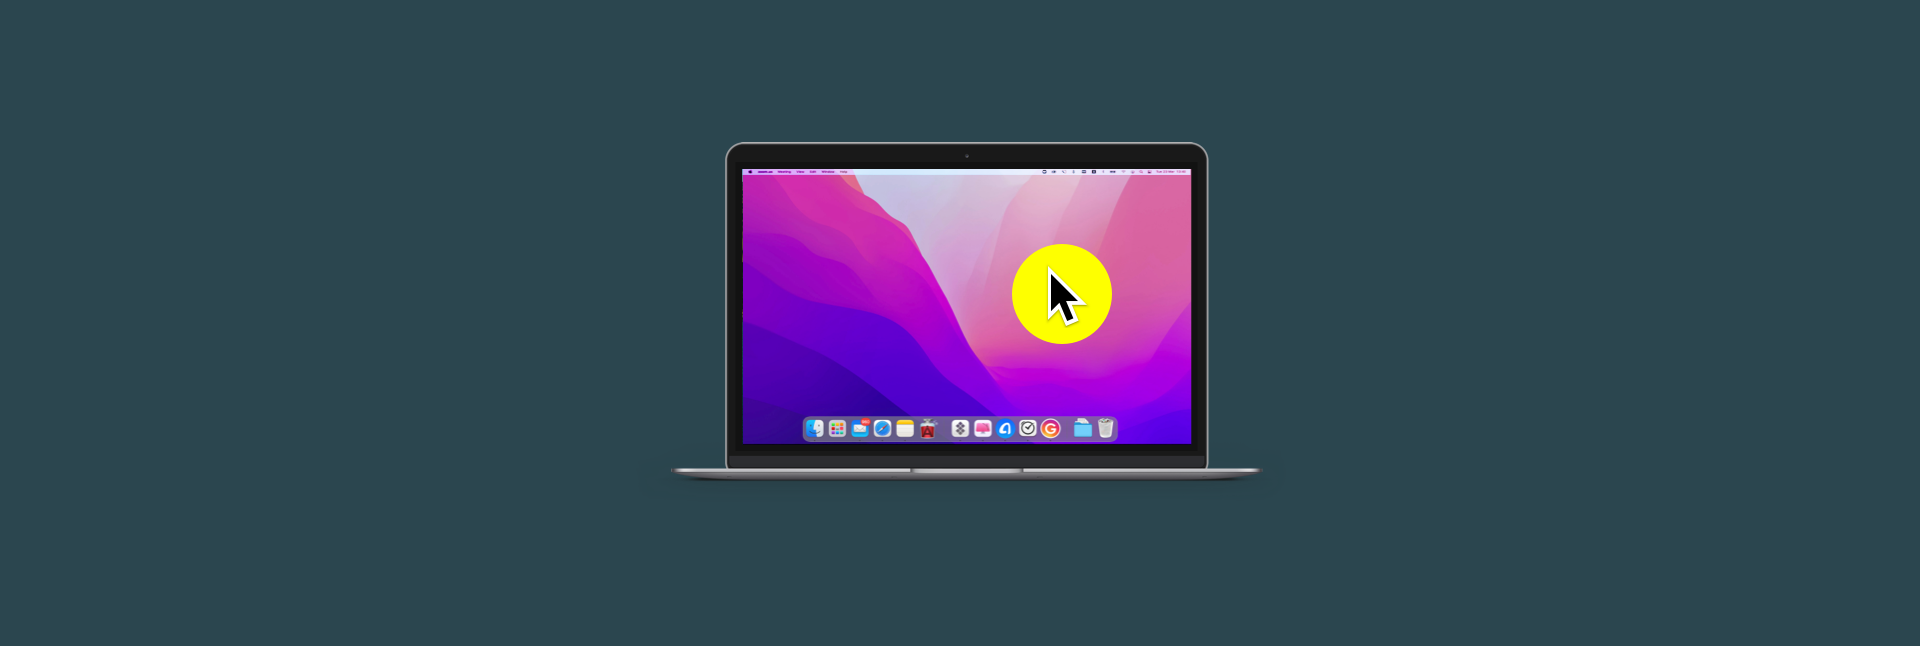 free for apple download Dual Monitor Auto Mouse Lock